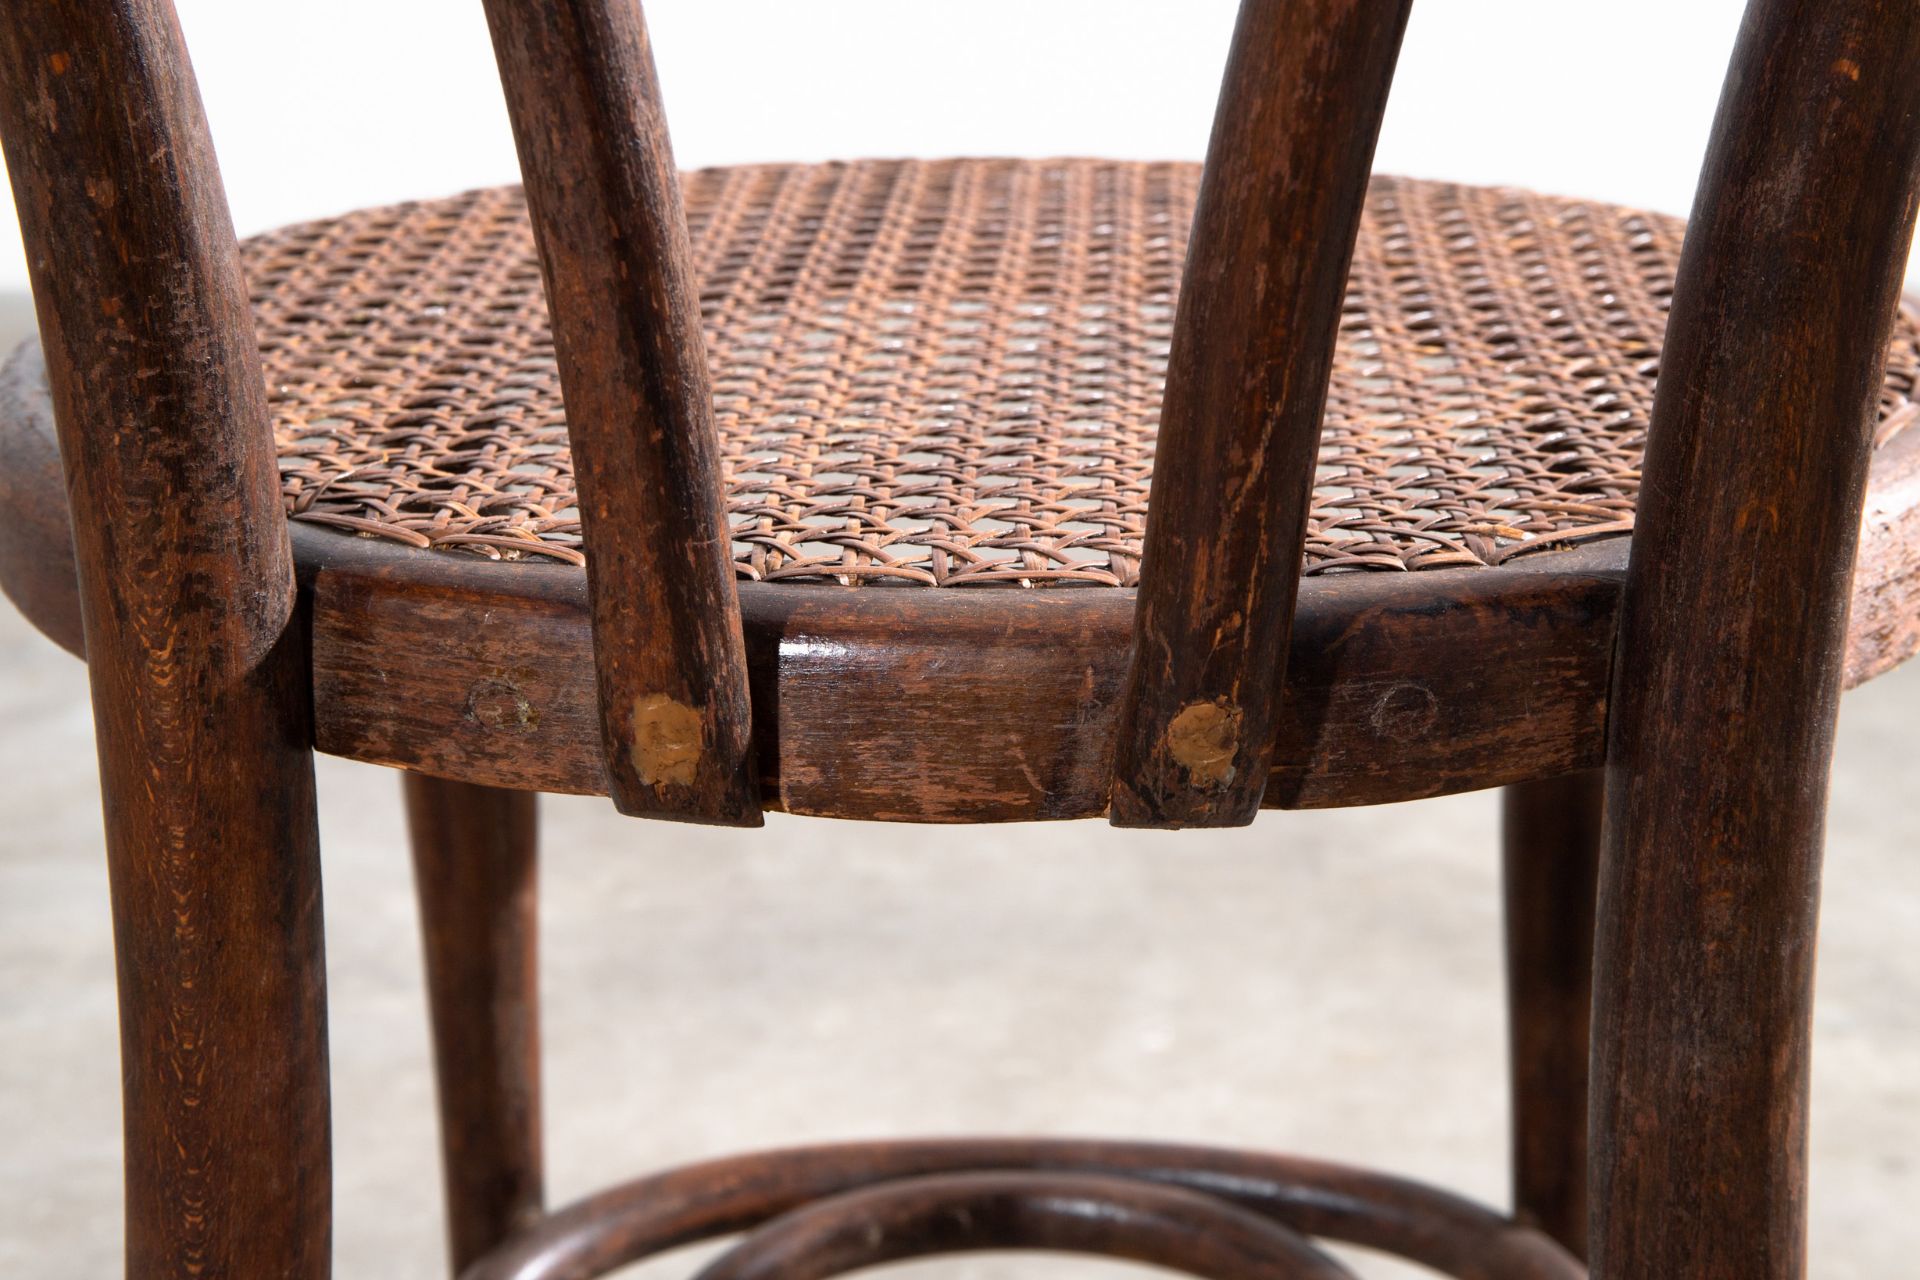 Thonet chair no. 18 with boot jack - Image 6 of 8